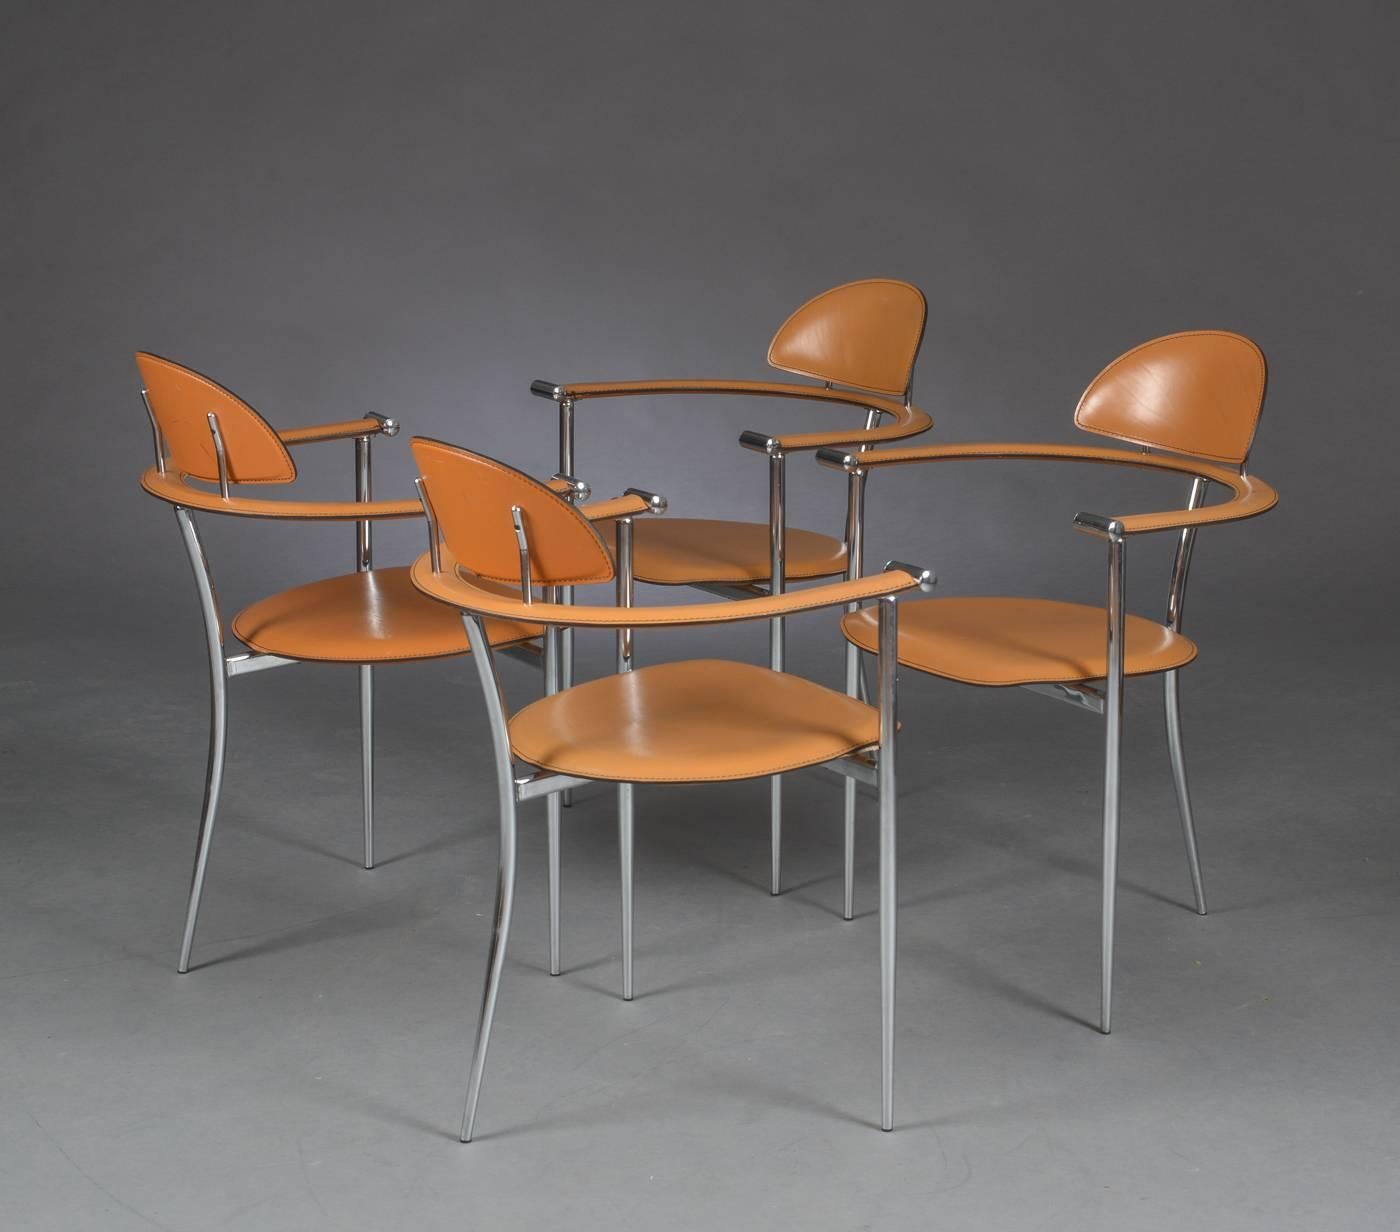 Arrben Italy armchairs, chromed metal frame, upholstered with patinated cognac leather. Seat height 46 cm. Produced by Arrben Design, Italy. 
Signs of wear, marks and wear.
Delivery item 2-3 weeks.
2 pieces available